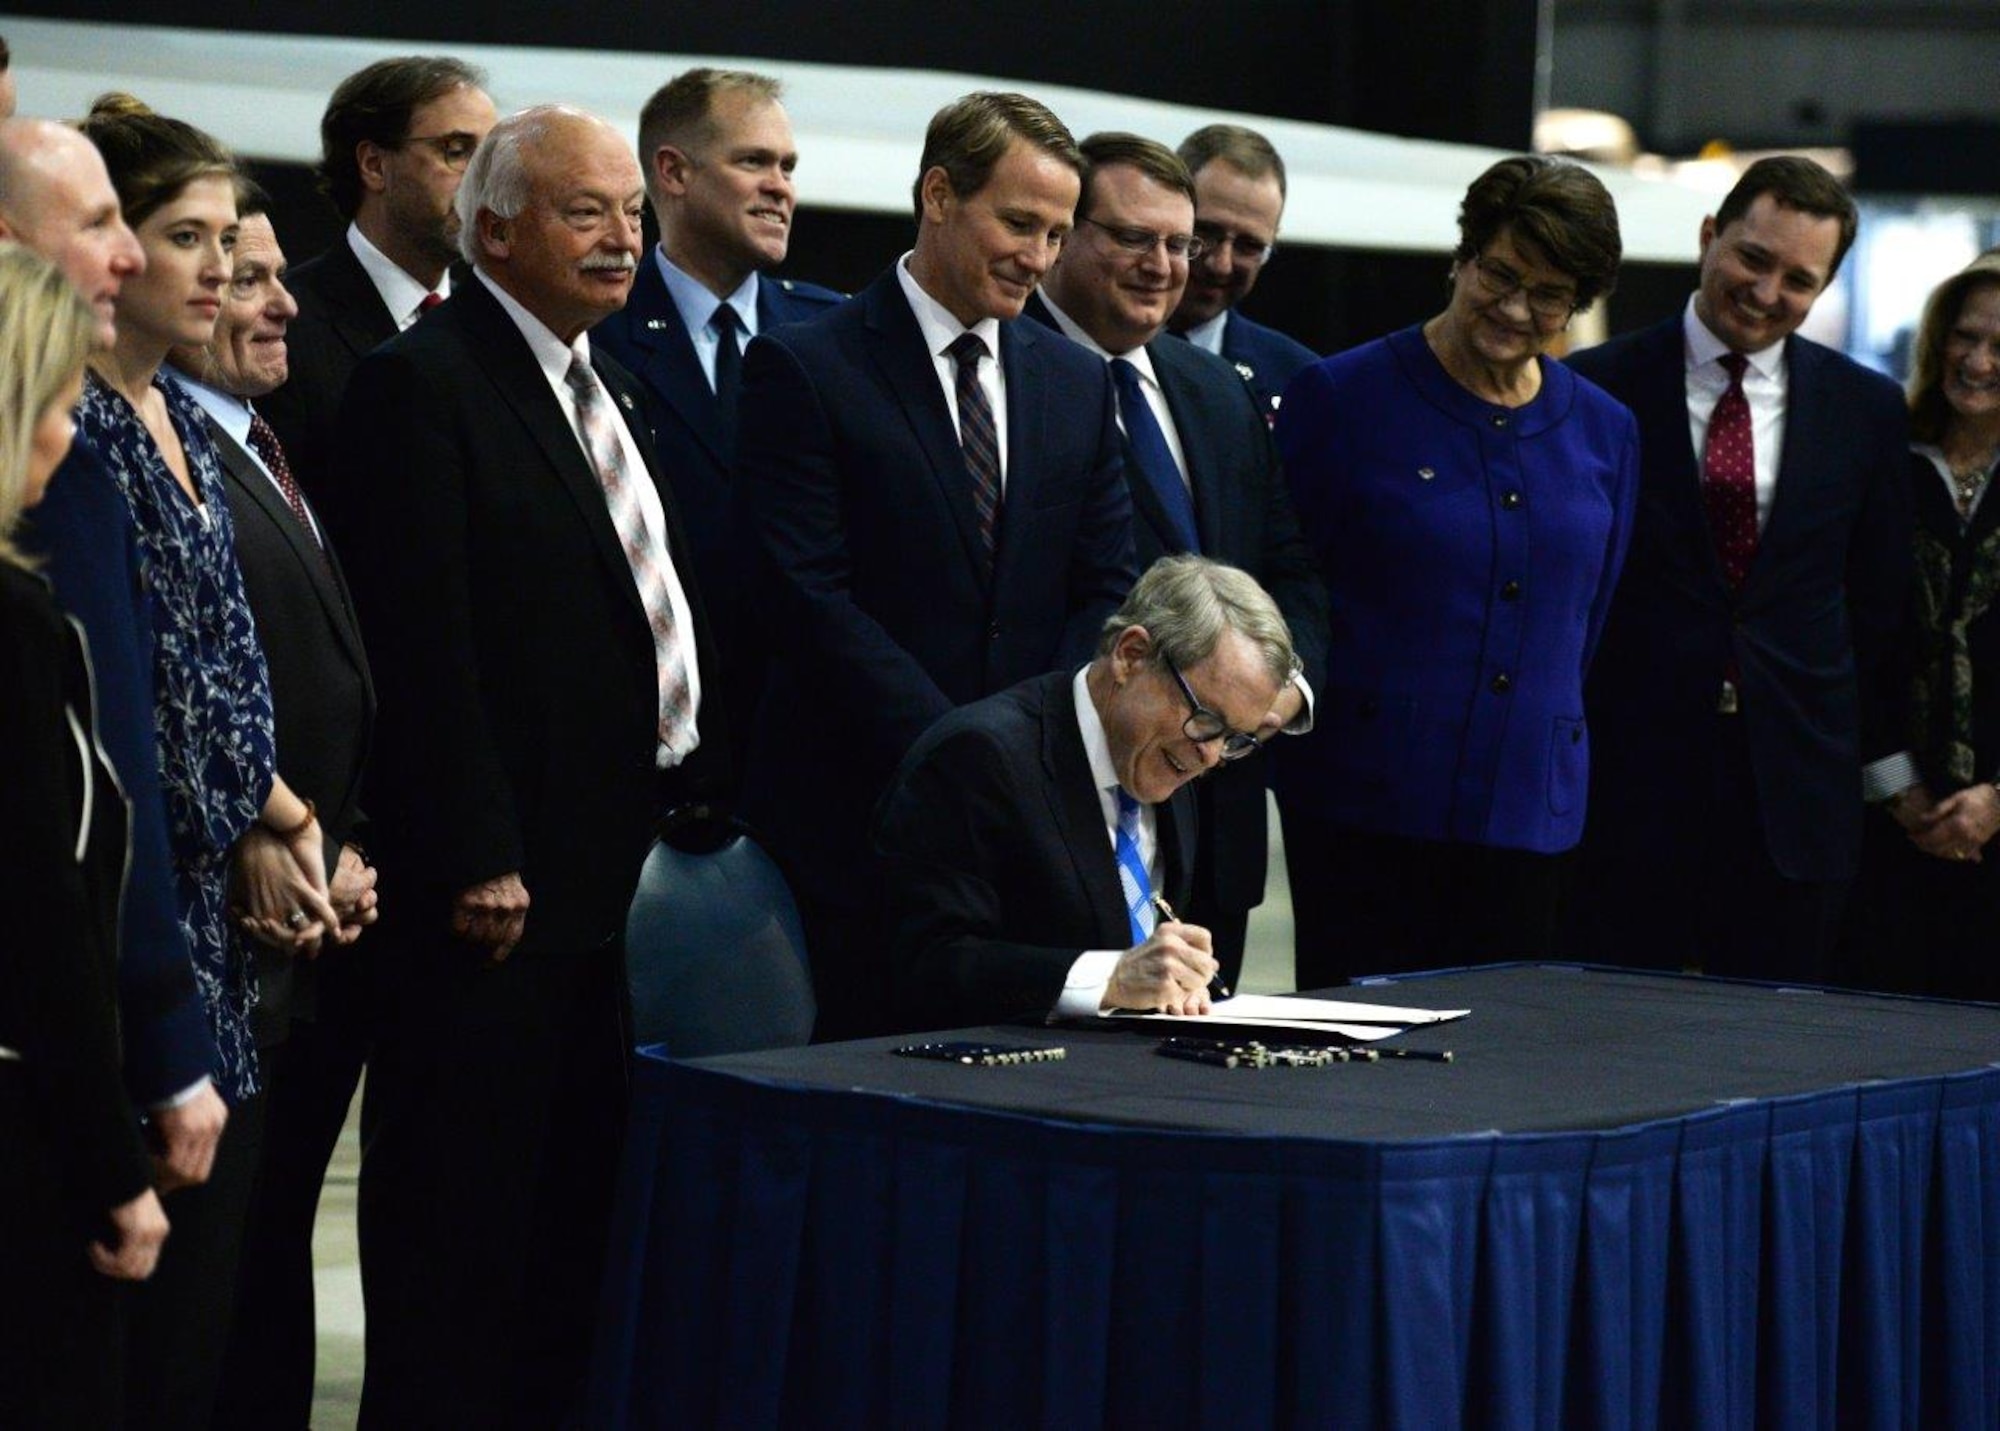 Ohio Governor Mike DeWine signs Senate Bill 7 into law at the National Museum of the United States Air Force, Wright-Patterson Air Force Base, Ohio, Jan. 27, 2020. The bill mandates Ohio agencies to issue licenses or certificates to qualifying military members and their spouses. (U.S. Air Force photo by Wesley Farnsworth)